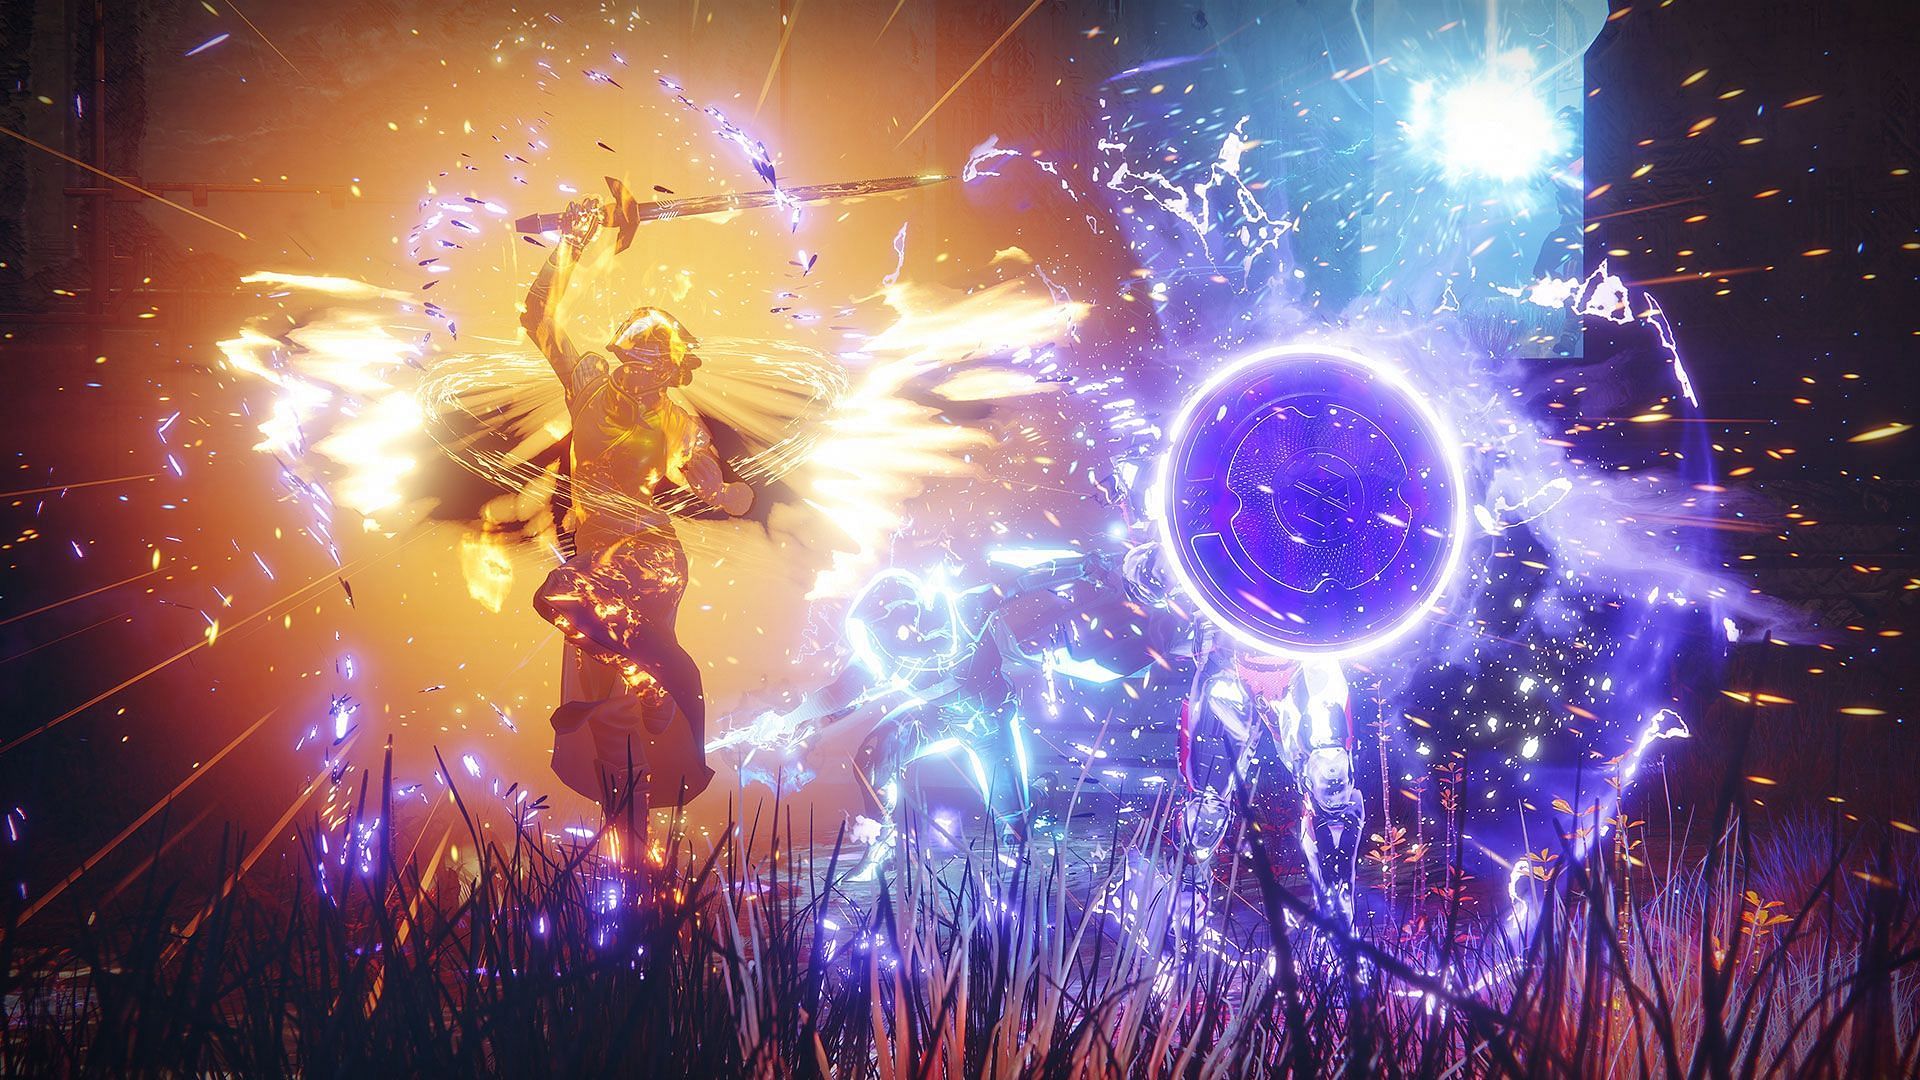 Destiny 2 Well of Radiance and Ward of Dawn